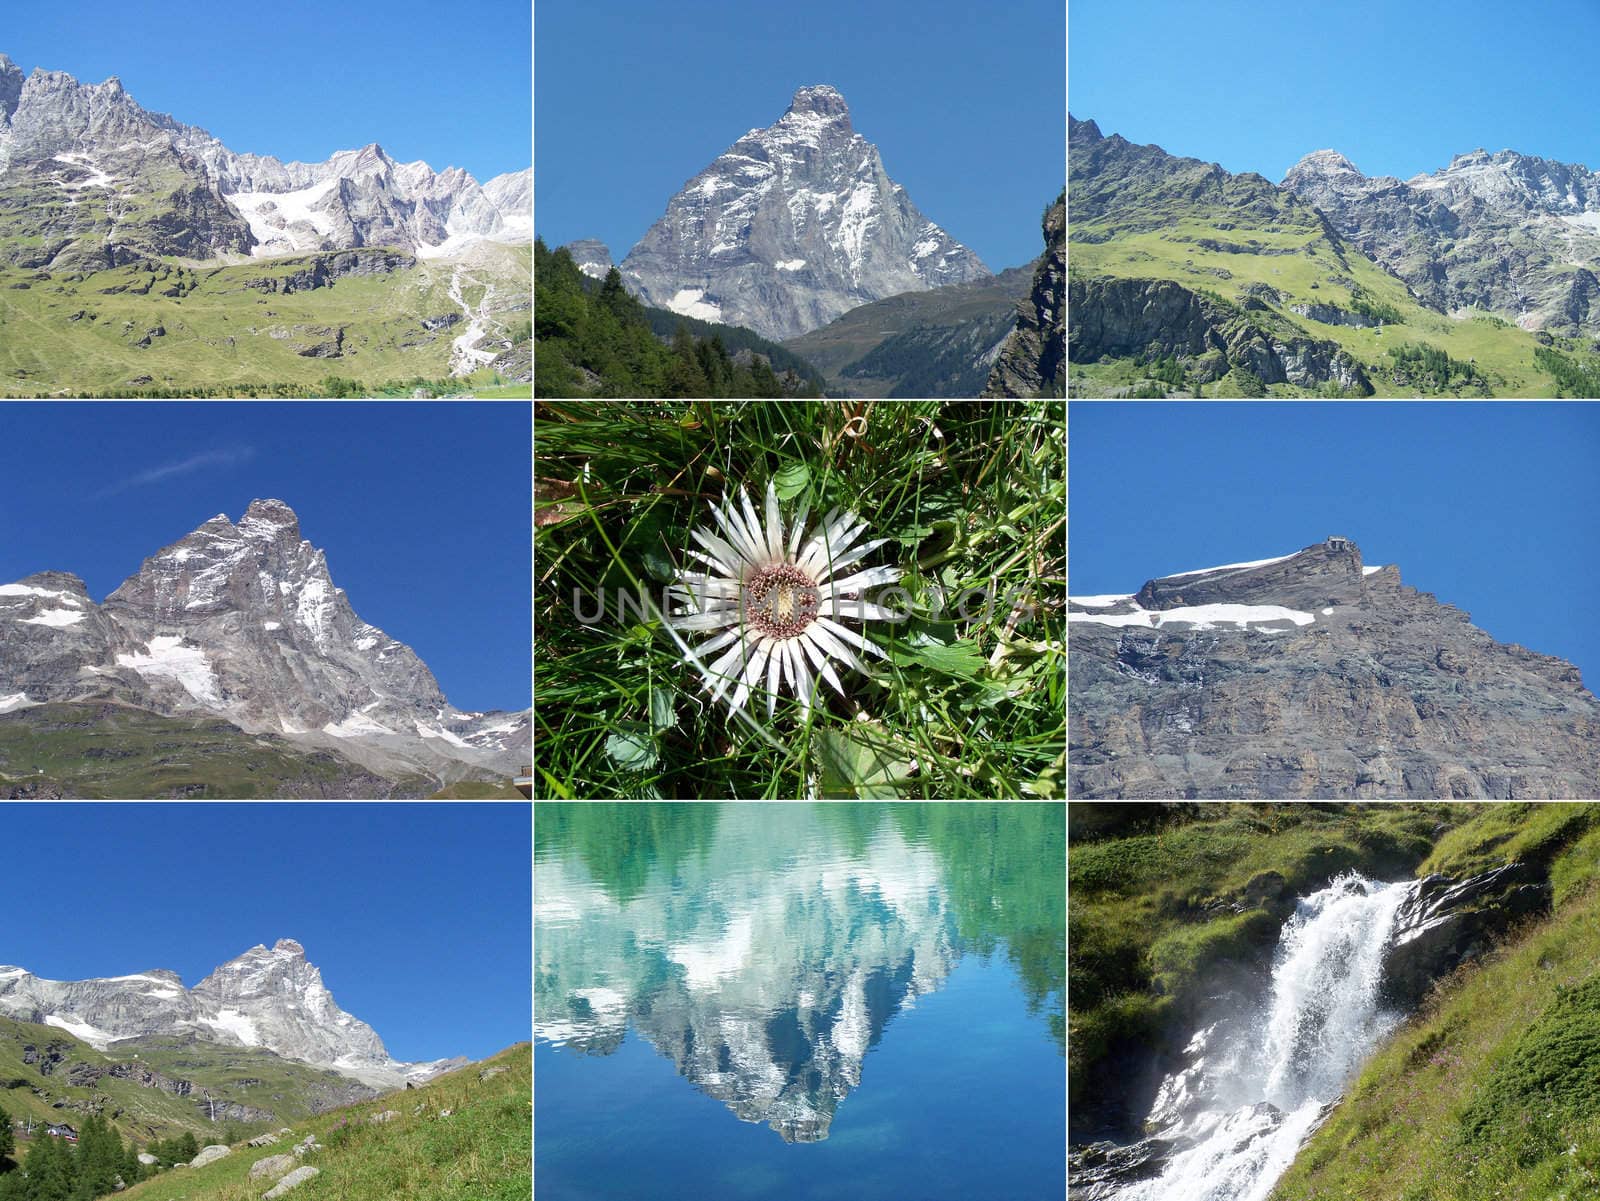 Alps mountains collage with Cervino Matterhorn mountain, waterfalls and Edelweiss flower